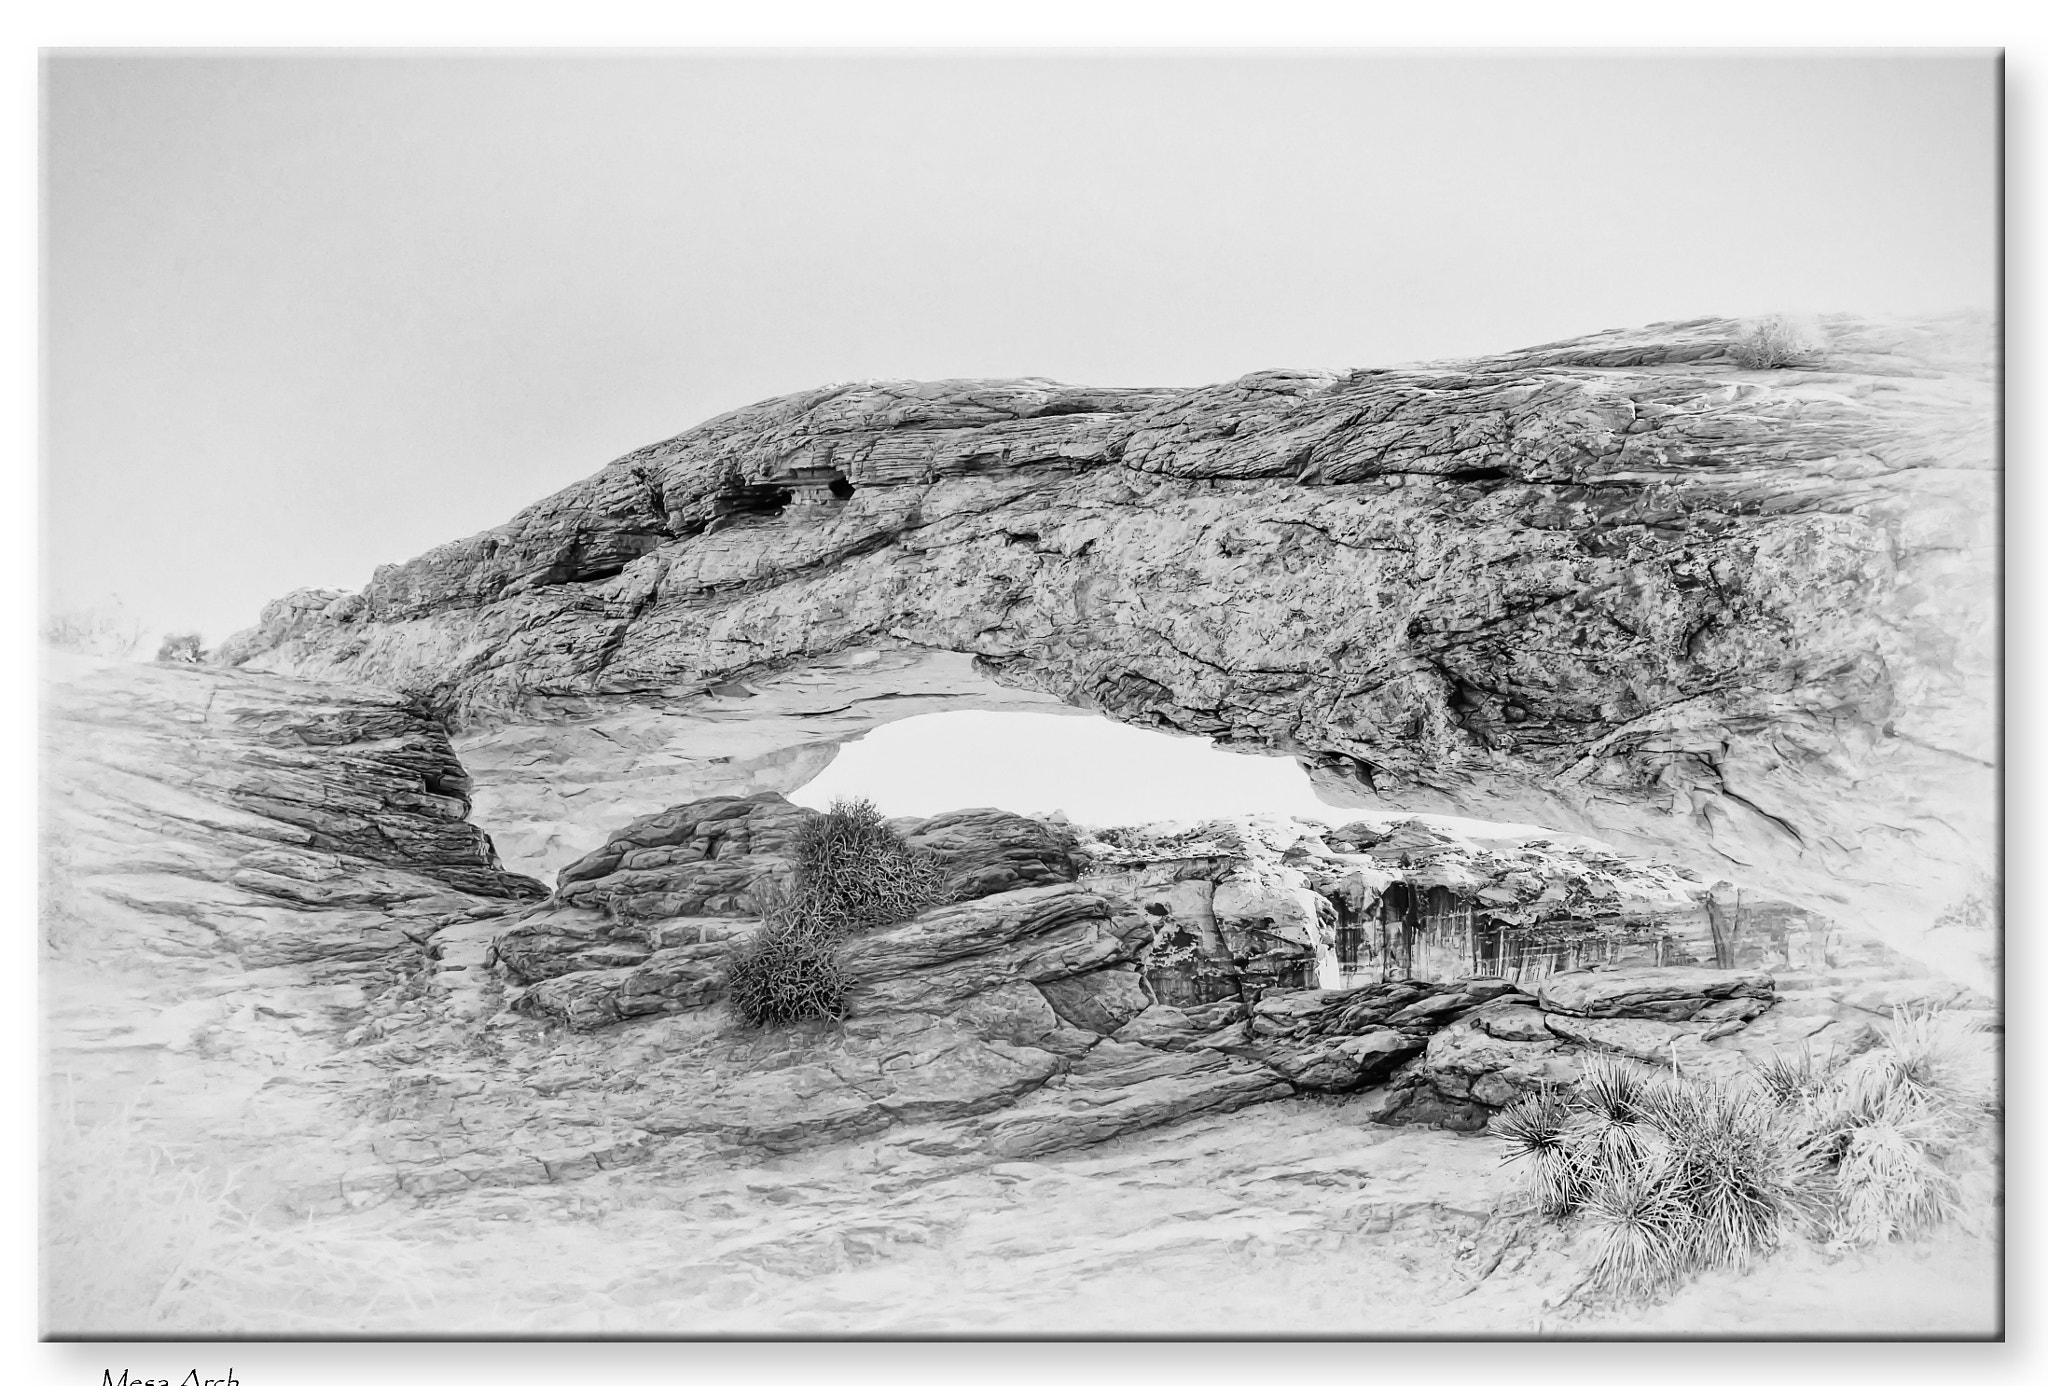 Nikon D300 sample photo. Mesa arch - another view photography